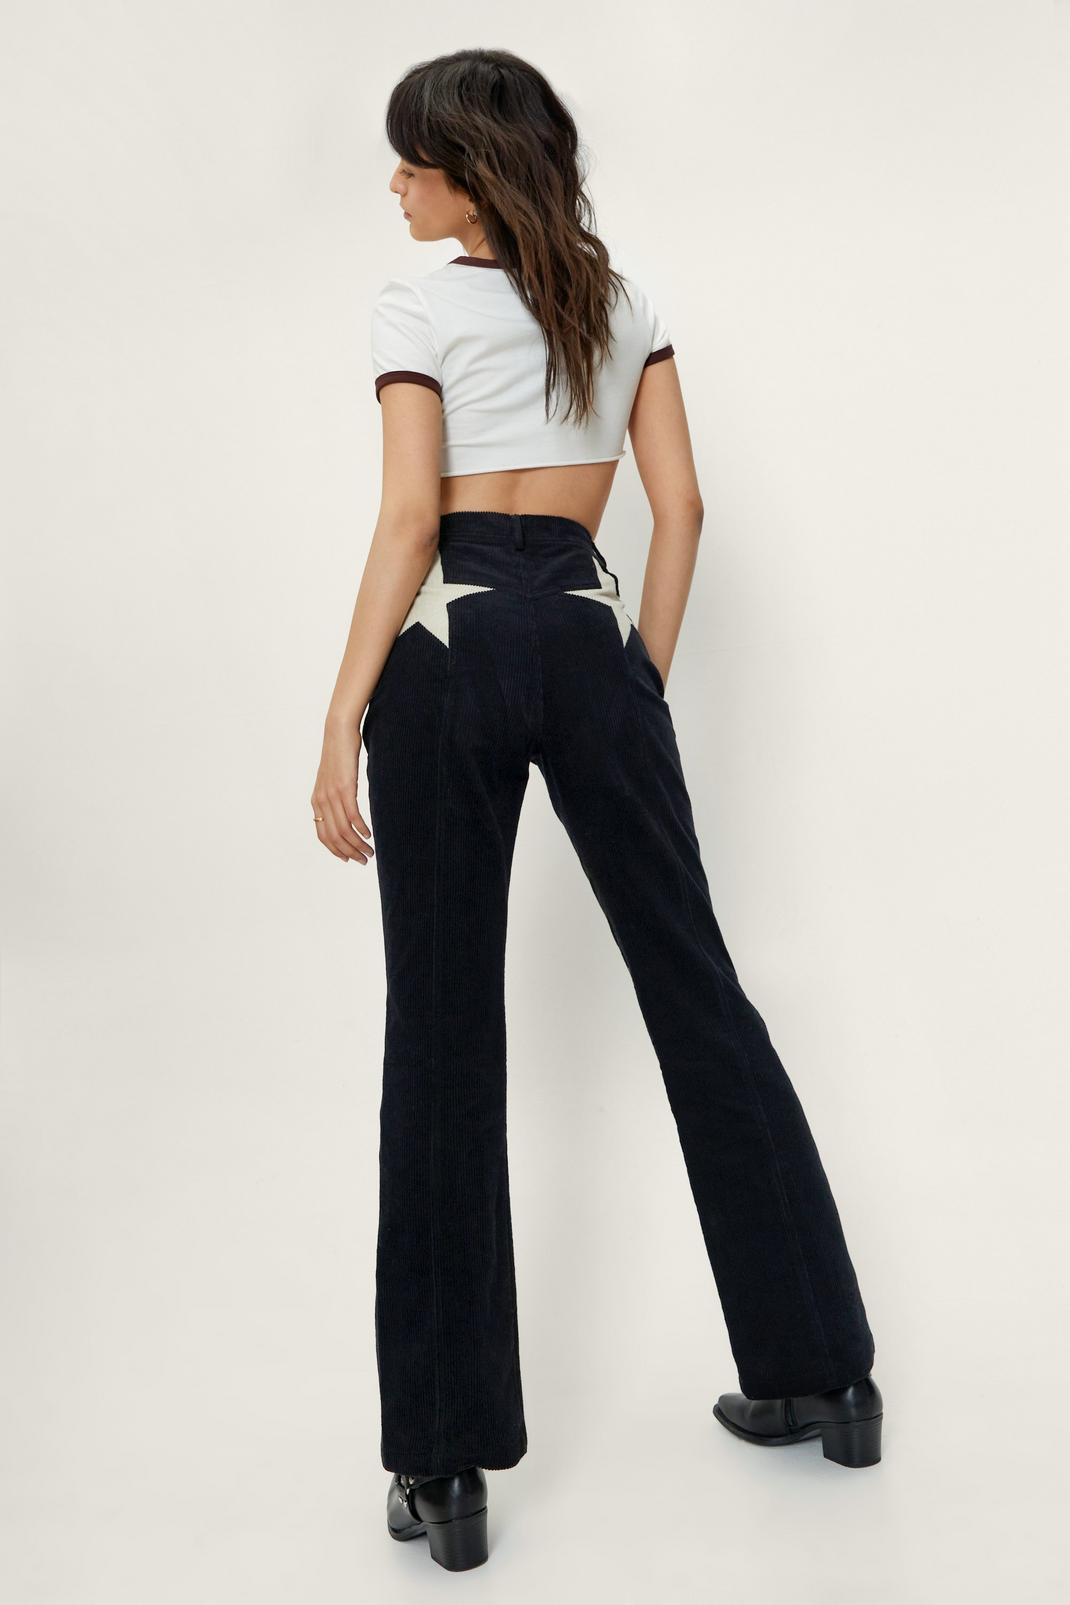 Black Corduroy High Waisted Flared Star Bum Trousers image number 1